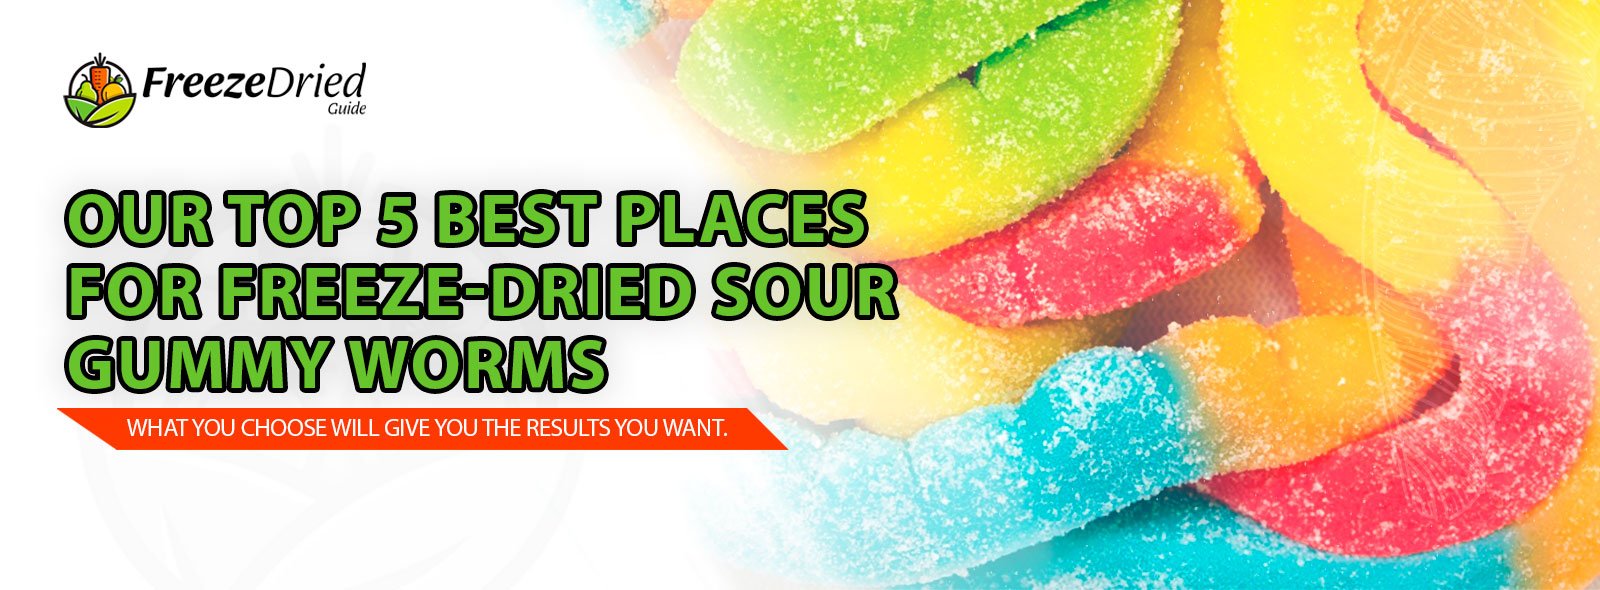 Best 5 Places to Buy FD Sour Gummy Worms Online